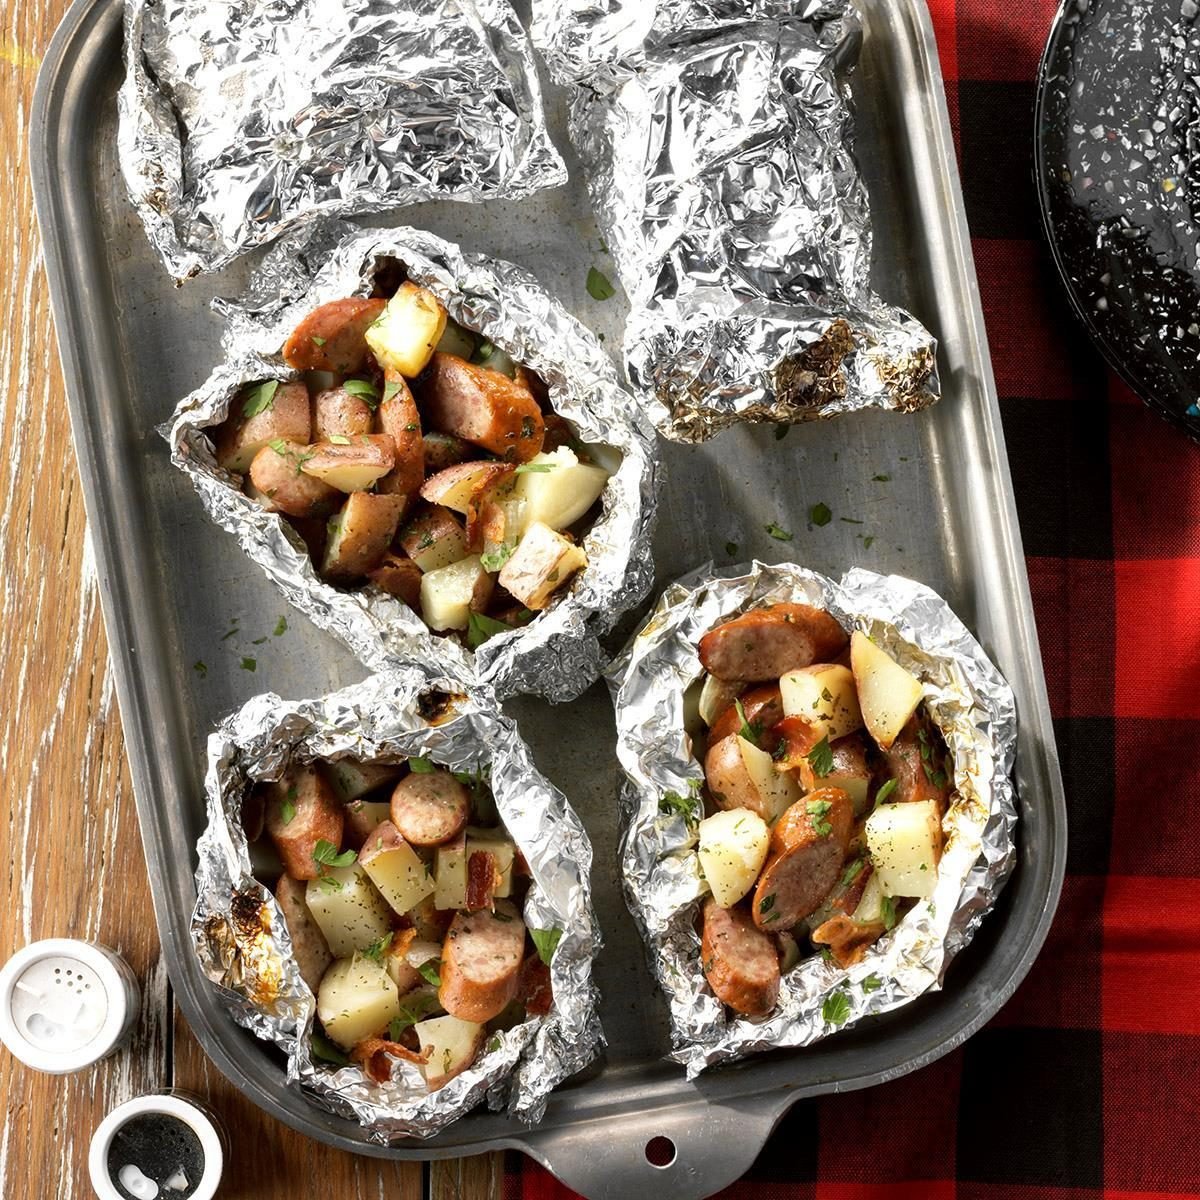 https://www.tasteofhome.com/wp-content/uploads/2019/10/Sausage-and-Potato-Campfire-Packets_EXPS_HCA19_60807_C08_01_2b-3.jpg?fit=700%2C1024